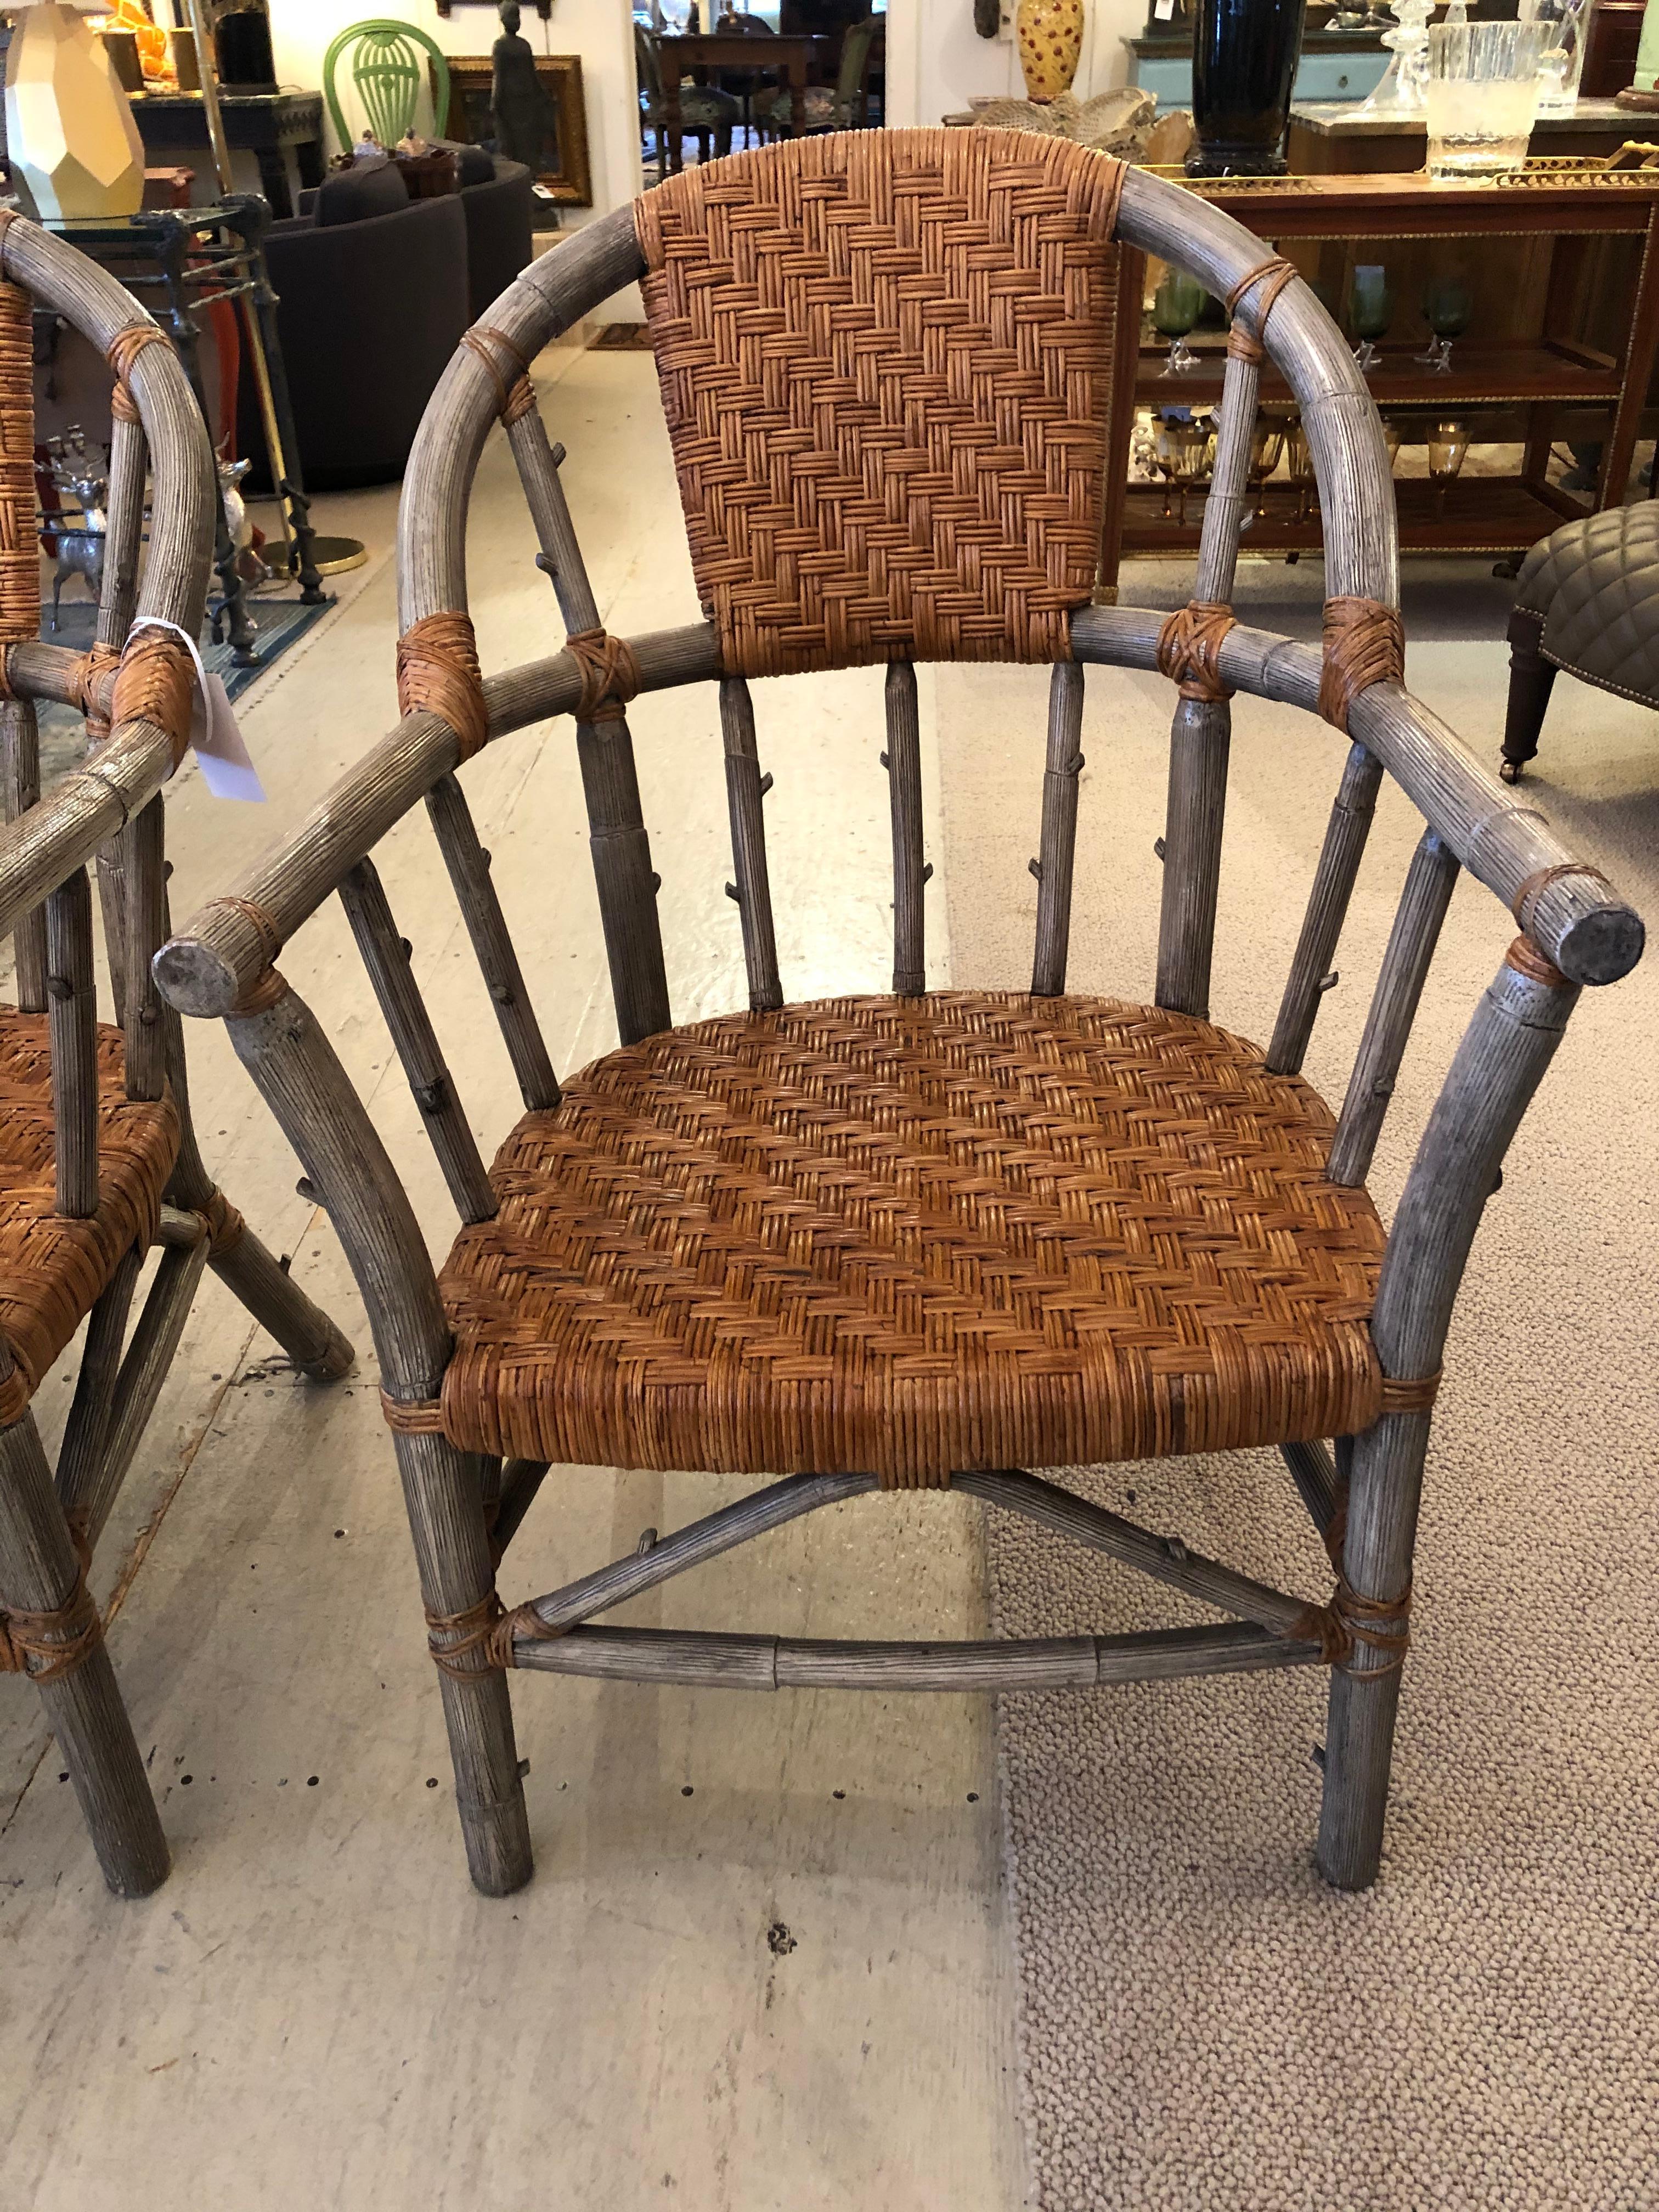 A handsome set of 4 armchairs, great for around a dining table or as living room chairs. The body of the chairs is a grey faux bois with contrasting tan woven rattan seats, back and decorative laces artfully accenting the joints.
Measure: Arm